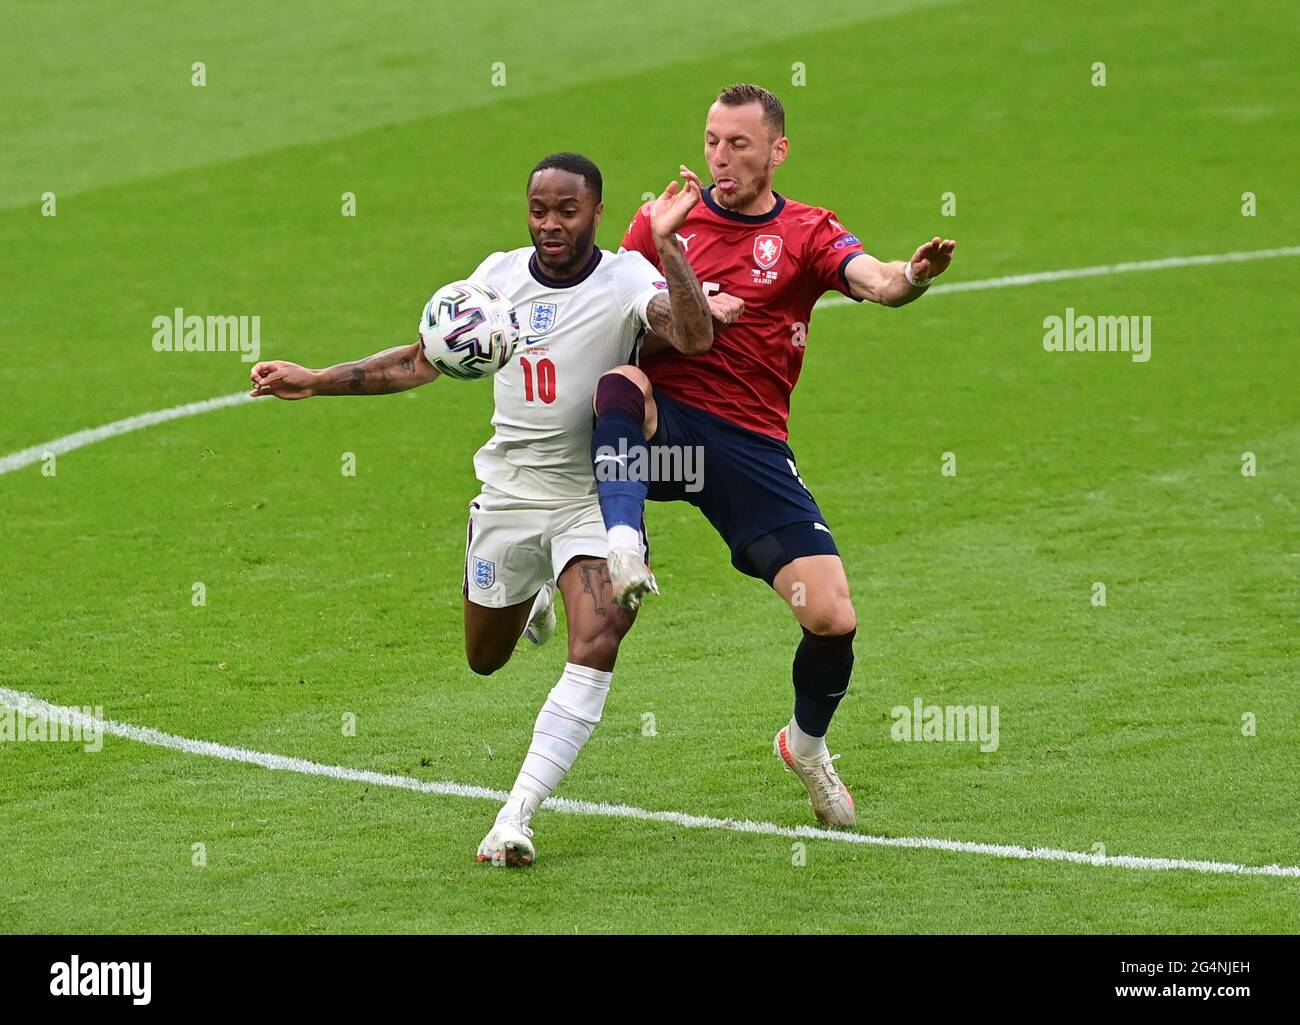 Soccer Football - Euro 2020 - Group D - Czech Republic v England - Wembley Stadium, London, Britain - June 22, 2021 England's Raheem Sterling in action with Czech Republic's Vladimir Coufal Pool via REUTERS/Neil Hall Stock Photo